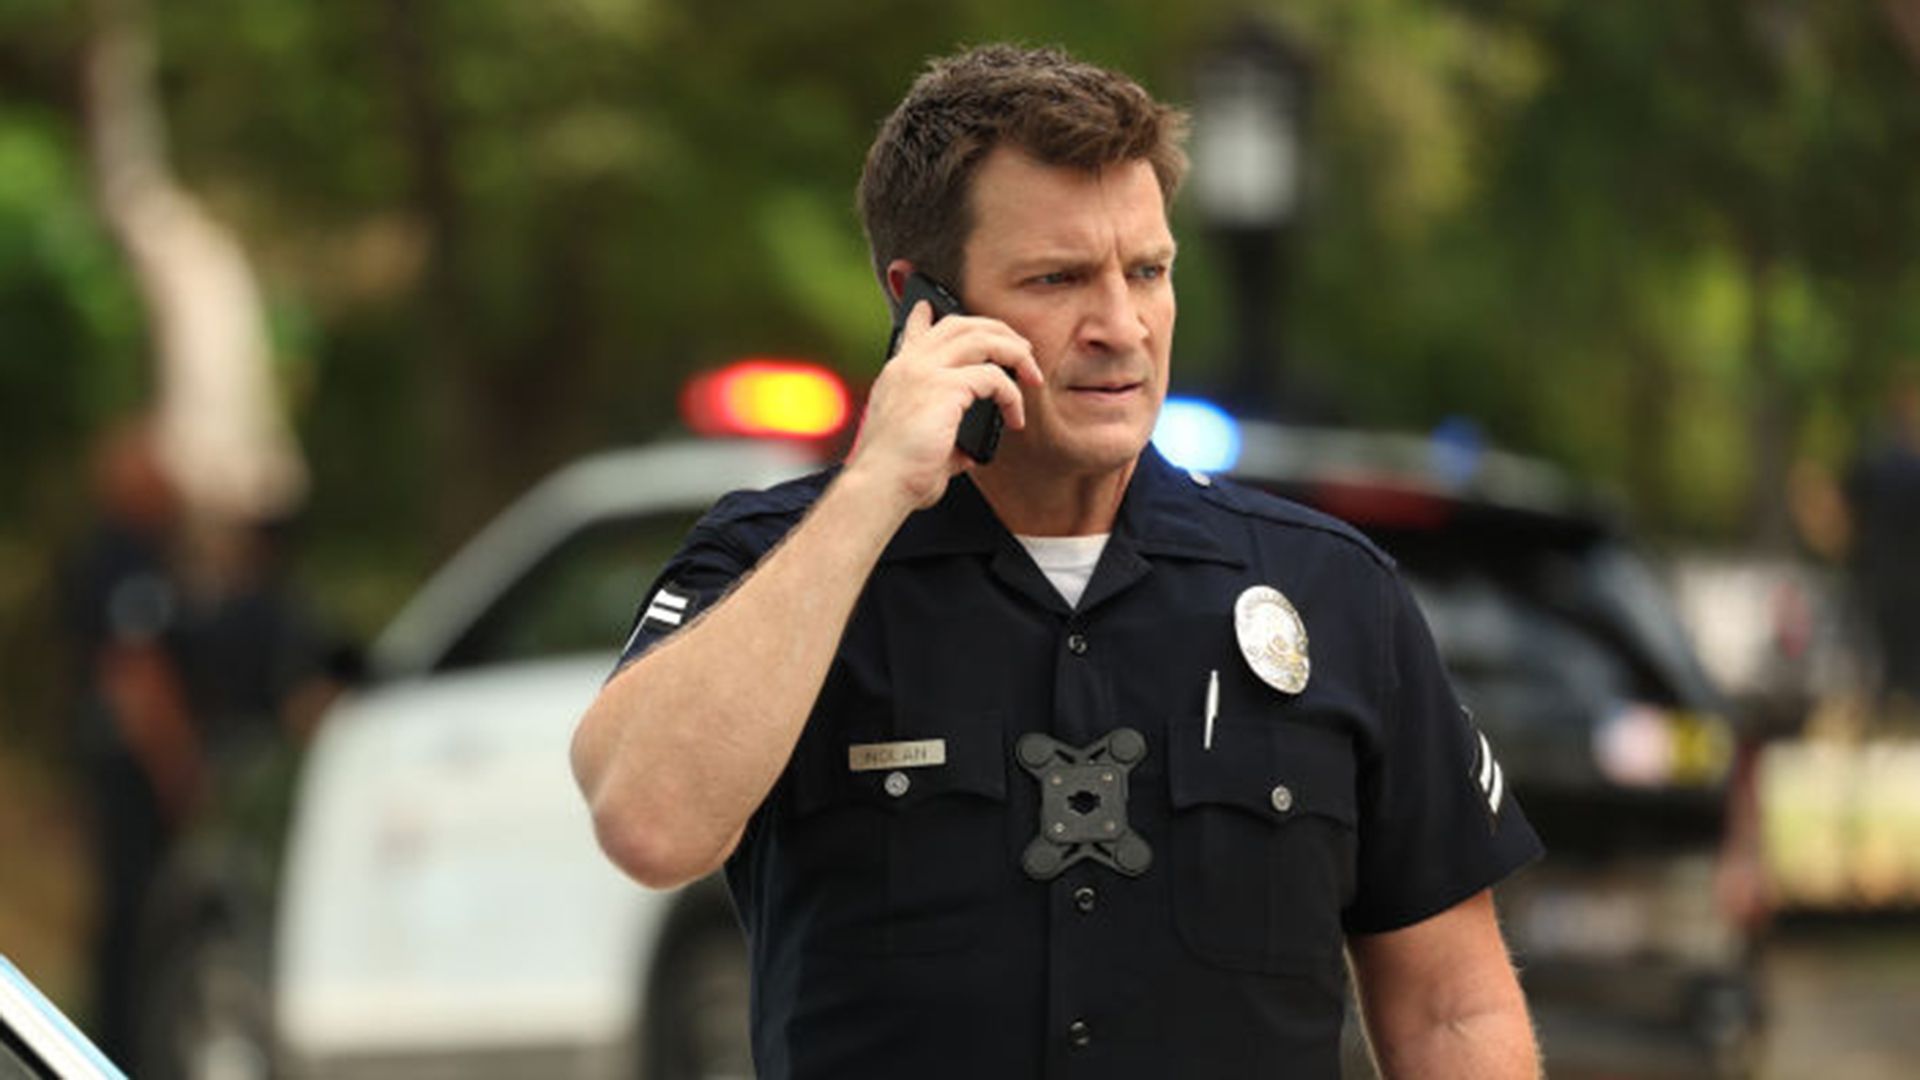 The Rookie's Nathan Fillion reveals unexpected project as fans ask - 'What about season six?'